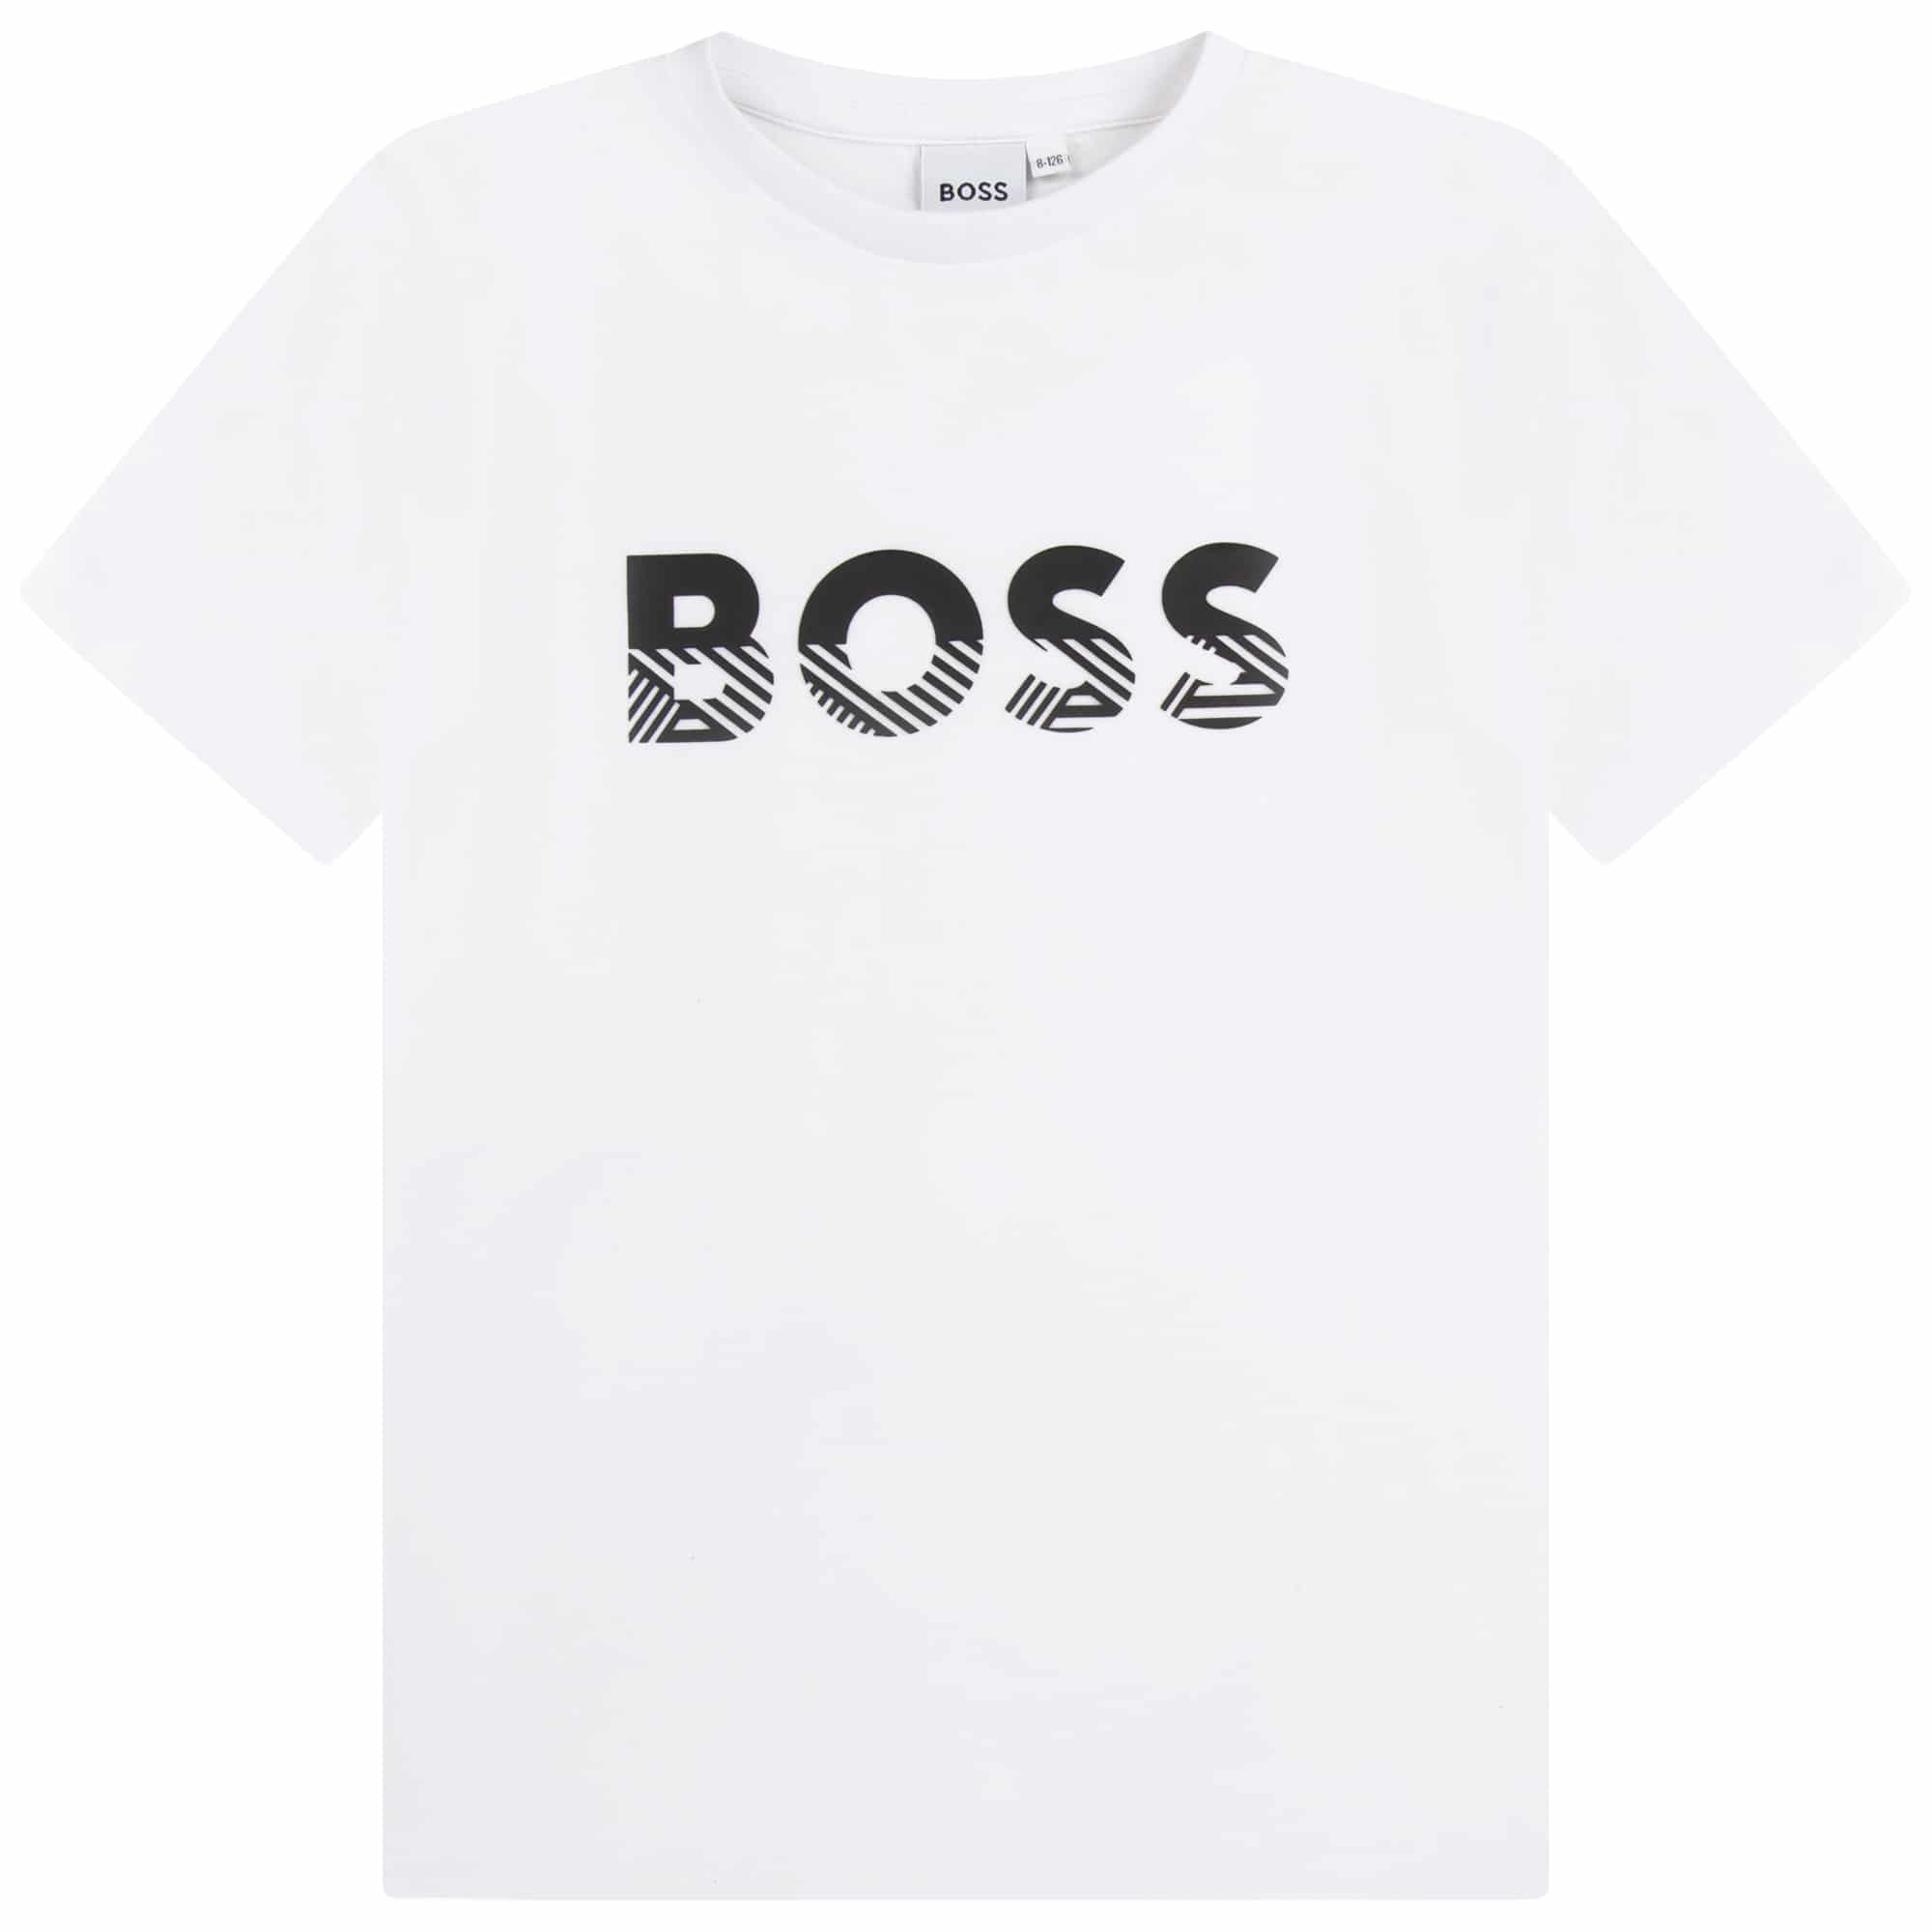 BOSS boys white tshirt with logo front view